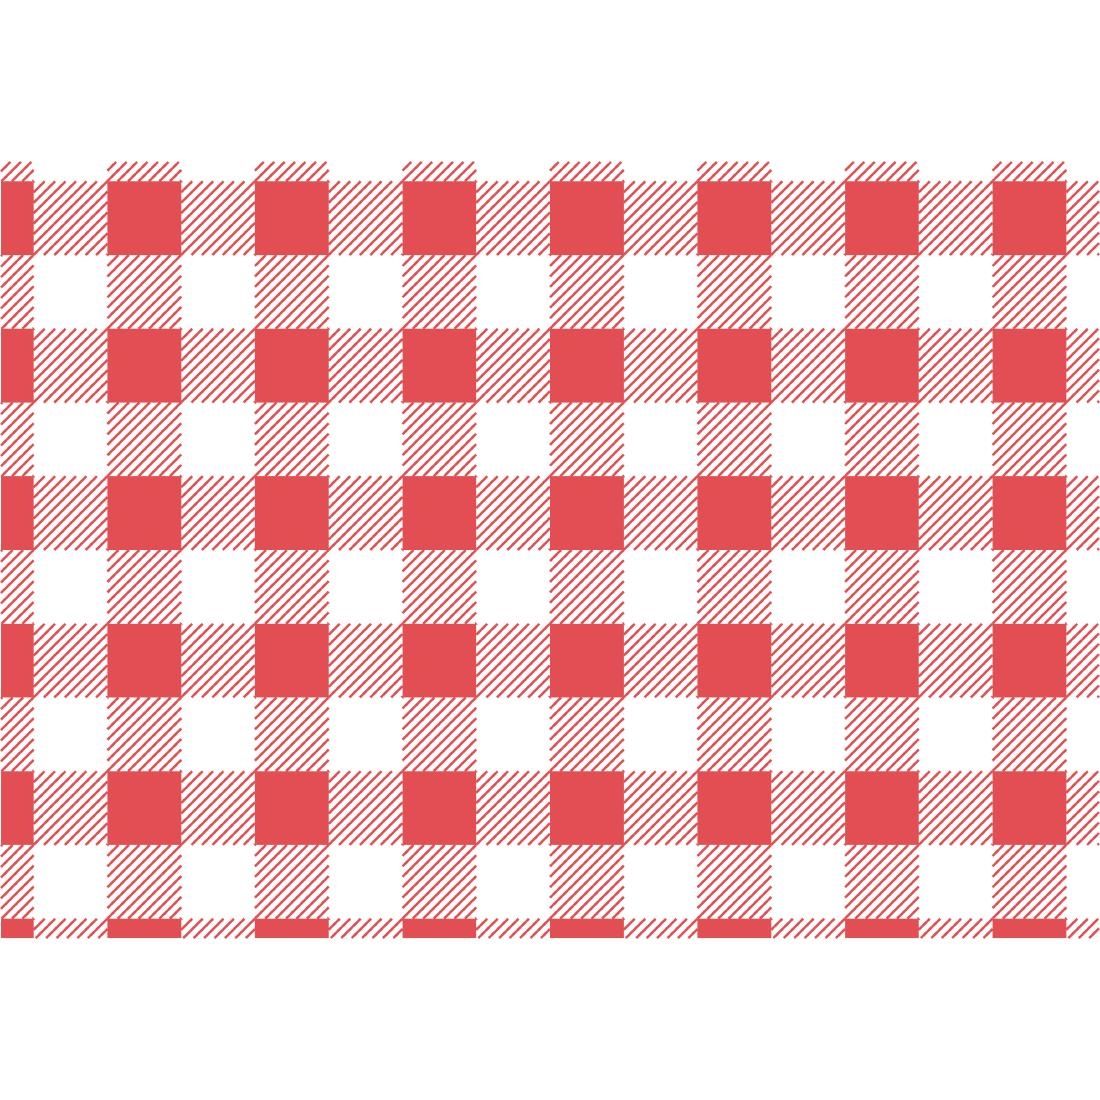 Greaseproof Paper Sheets Red Gingham 250 x 250mm (Pack of 200) - CL657